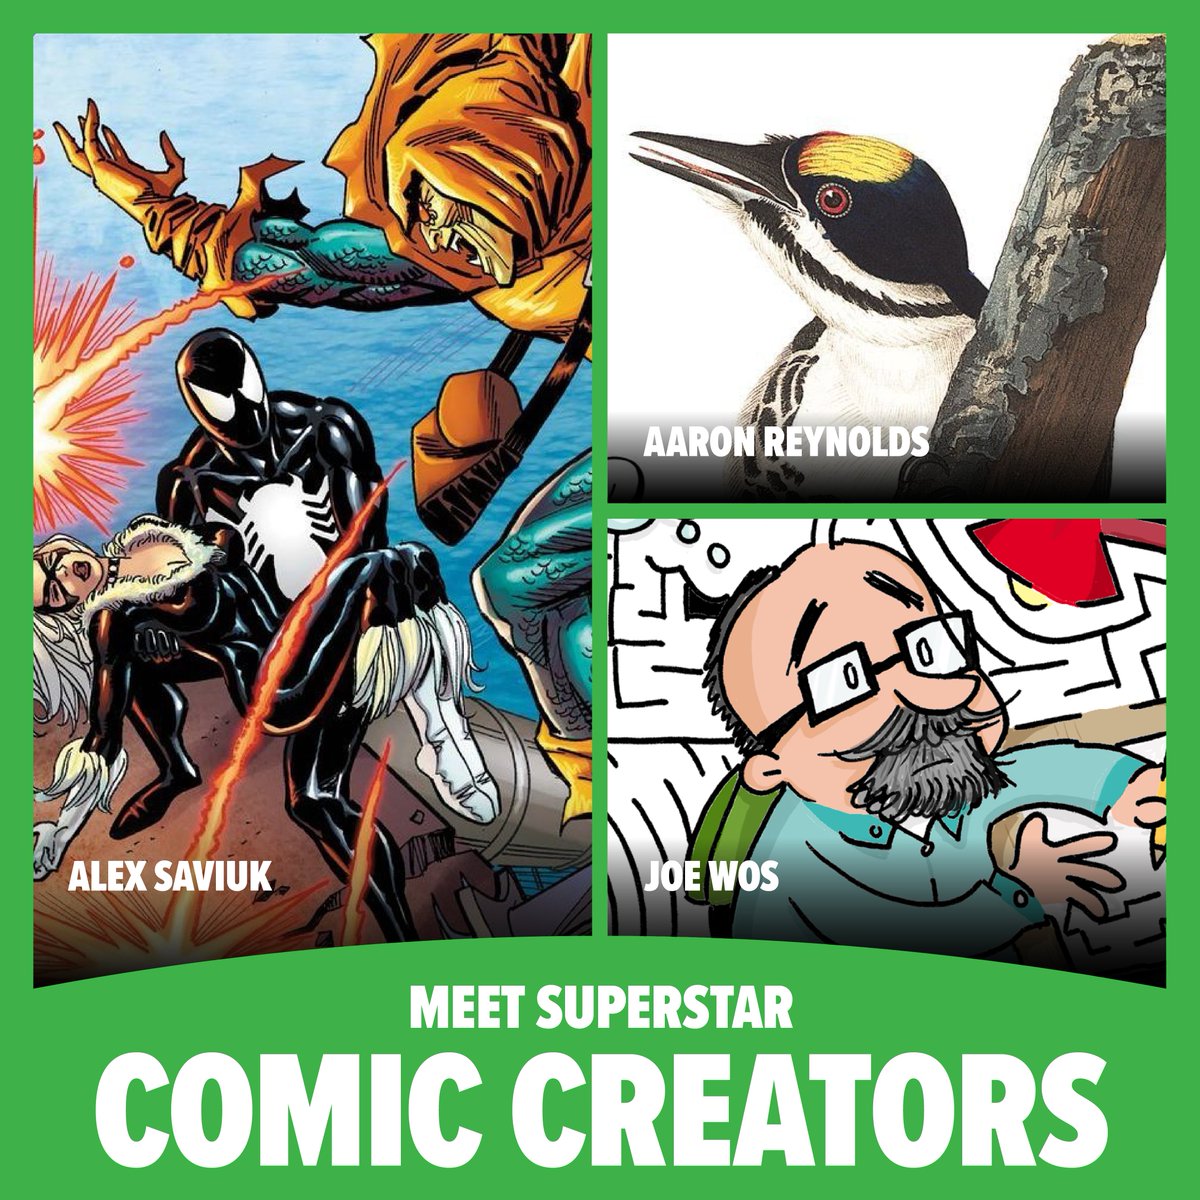 Ready to get drawn into the world of comics? Your favorite comic creators like Rags Morales and Alex Saviuk are coming to FAN EXPO Philadelphia. Plus, don’t miss out on epic events and highly collectible show exclusives. Grab your show tickets now. spr.ly/6012bU264